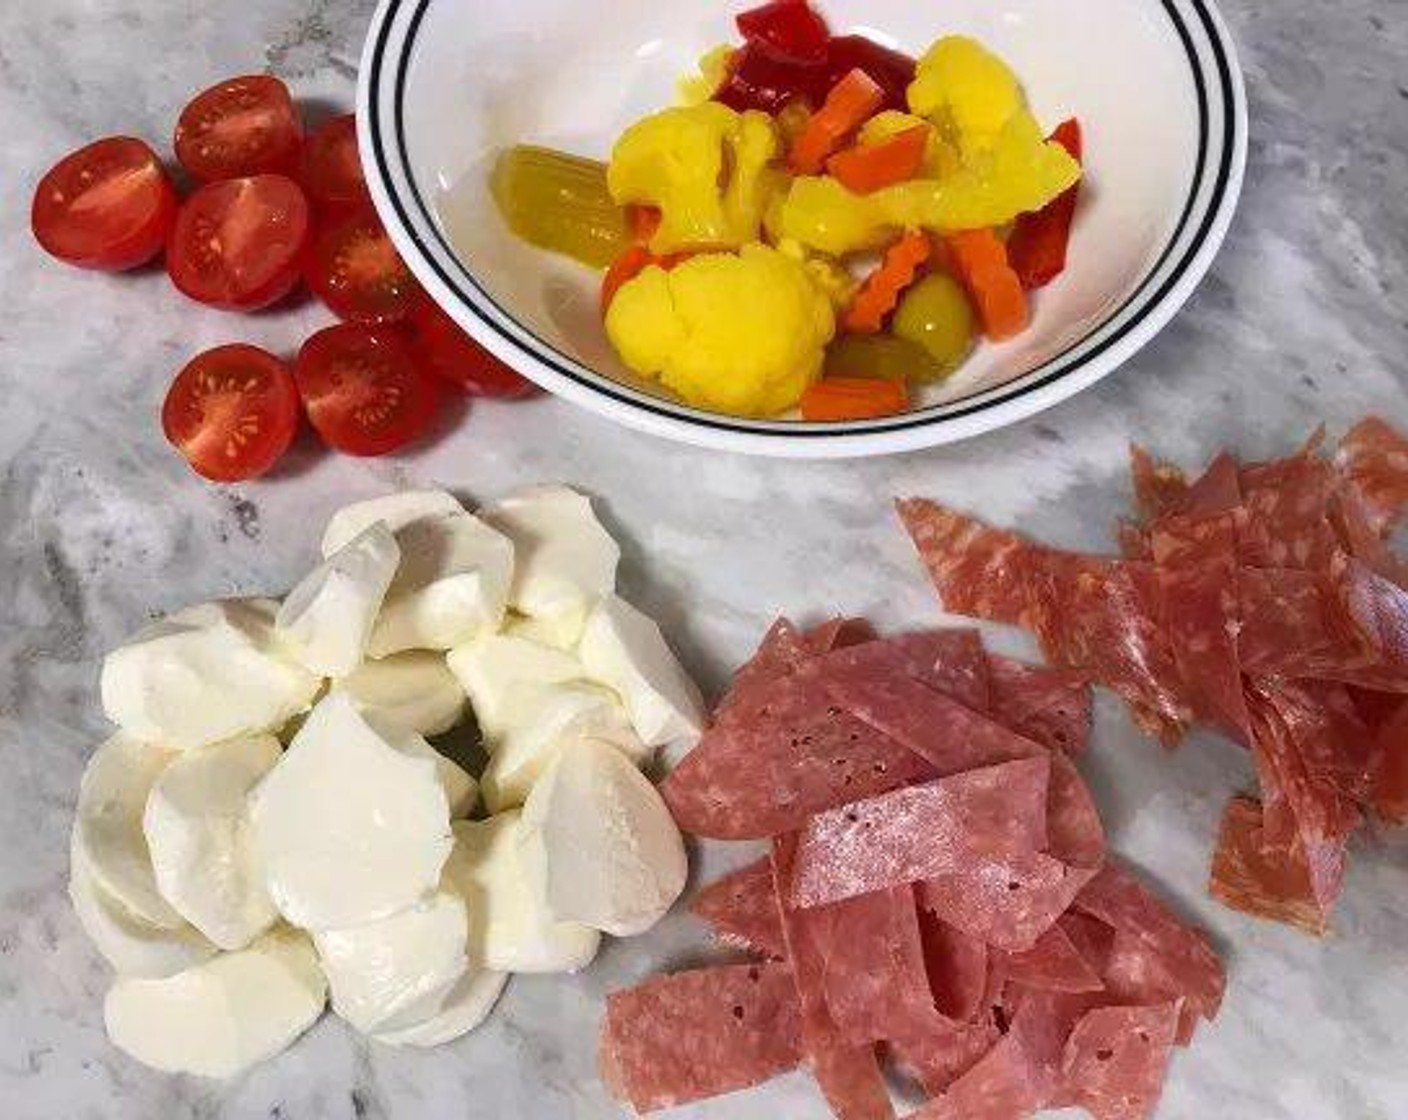 step 1 Start by preparing the toppings. Slice thin slivers of the Salami (4 slices) and Soppressate (4 slices). Slice the Fresh Mozzarella Cheese Ball (2/3 cup). Cut the Cherry Tomatoes (4) into halves. Measure out the pickled Mixed Vegetables (1/2 cup). If preparing ahead of time, refrigerate toppings until ready to cook.